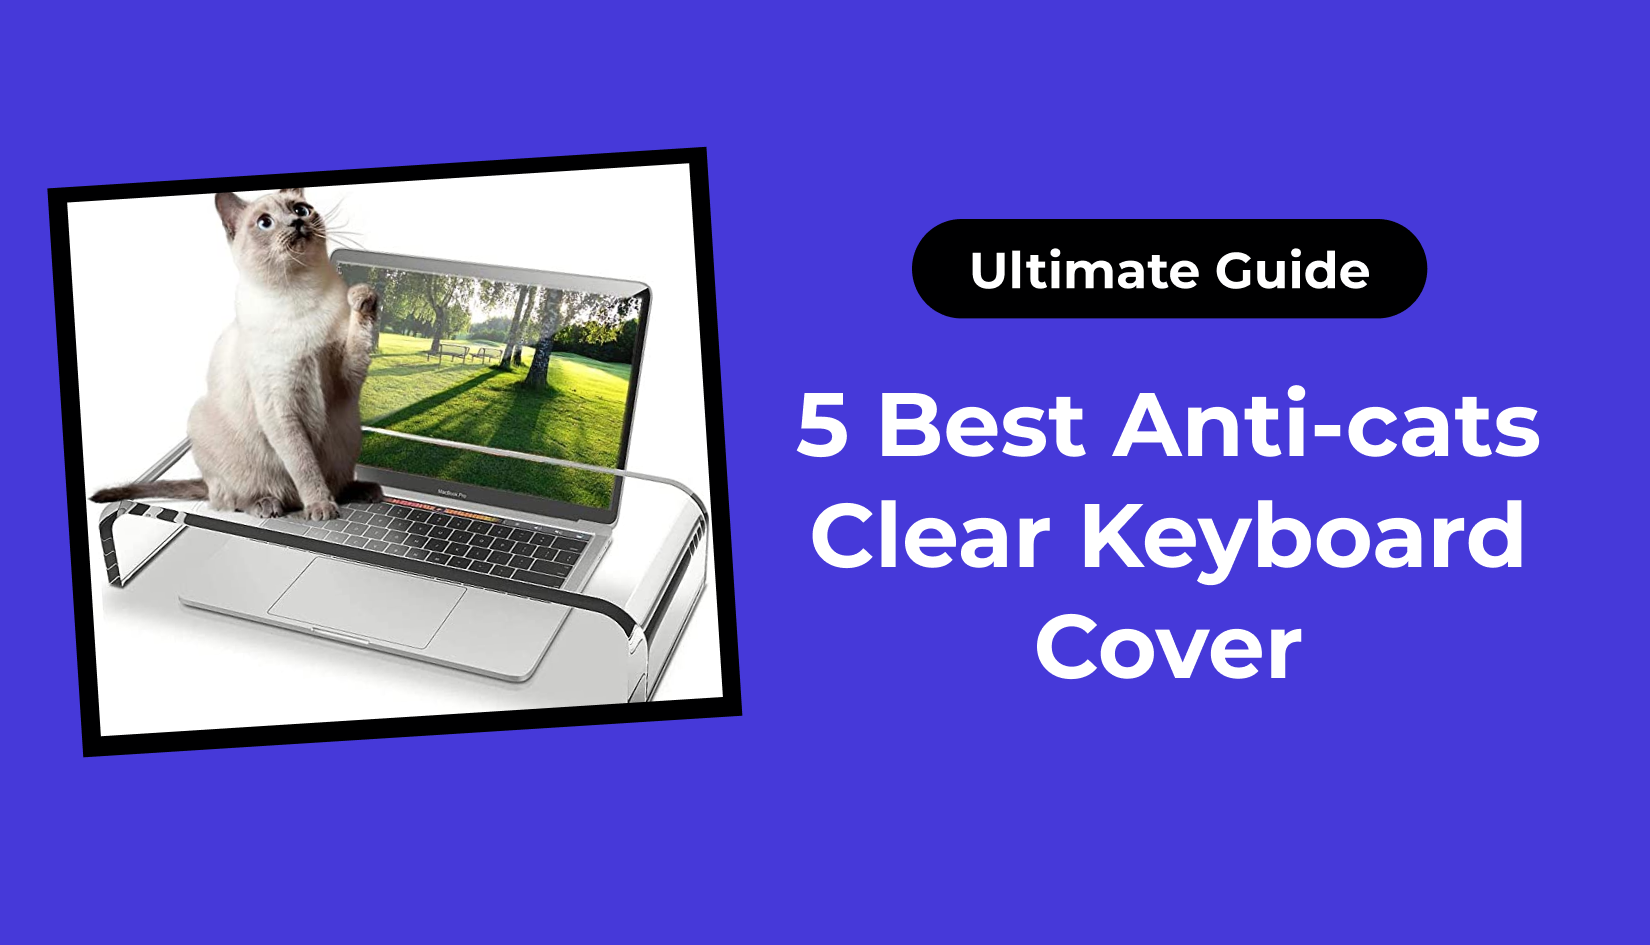 5 Best Anti-cats Clear Keyboard Cover (Ultimate Guide)